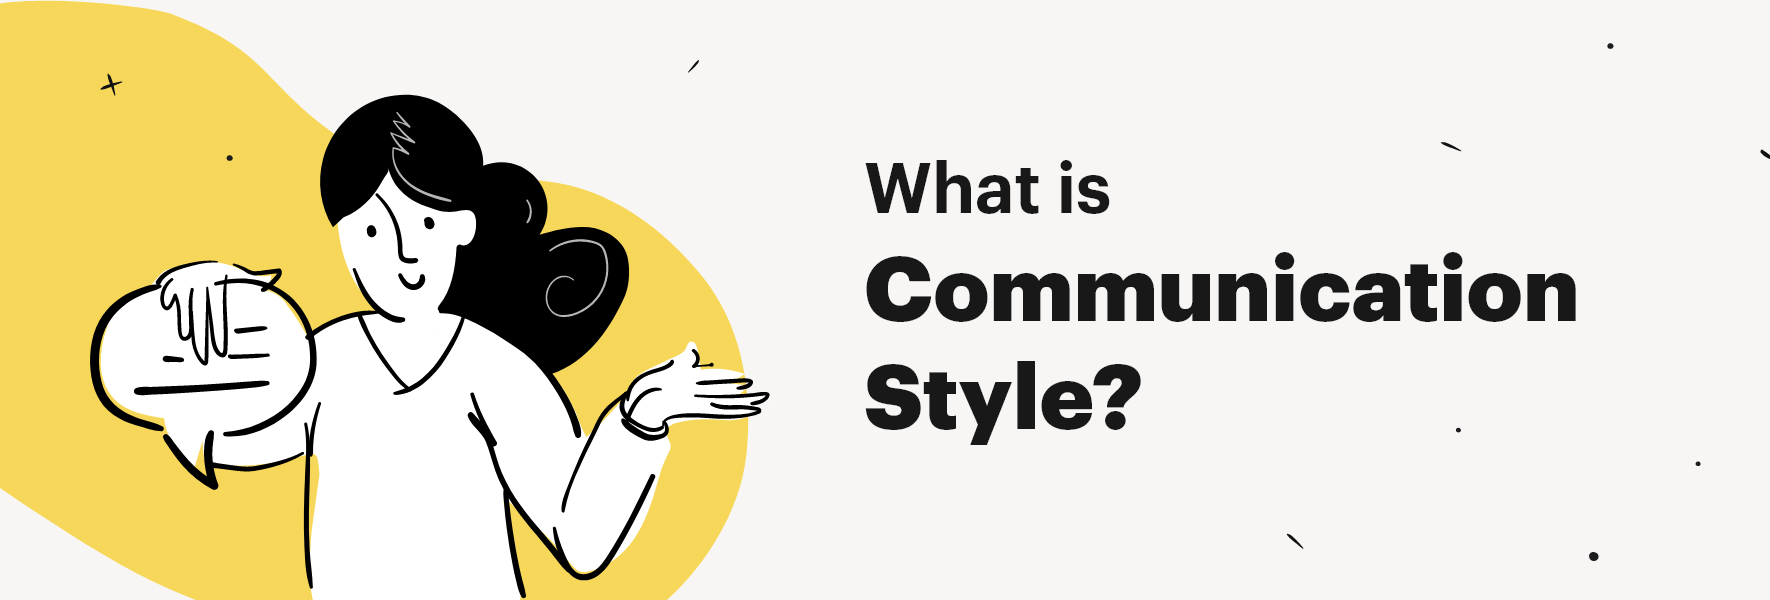 What is communication style?